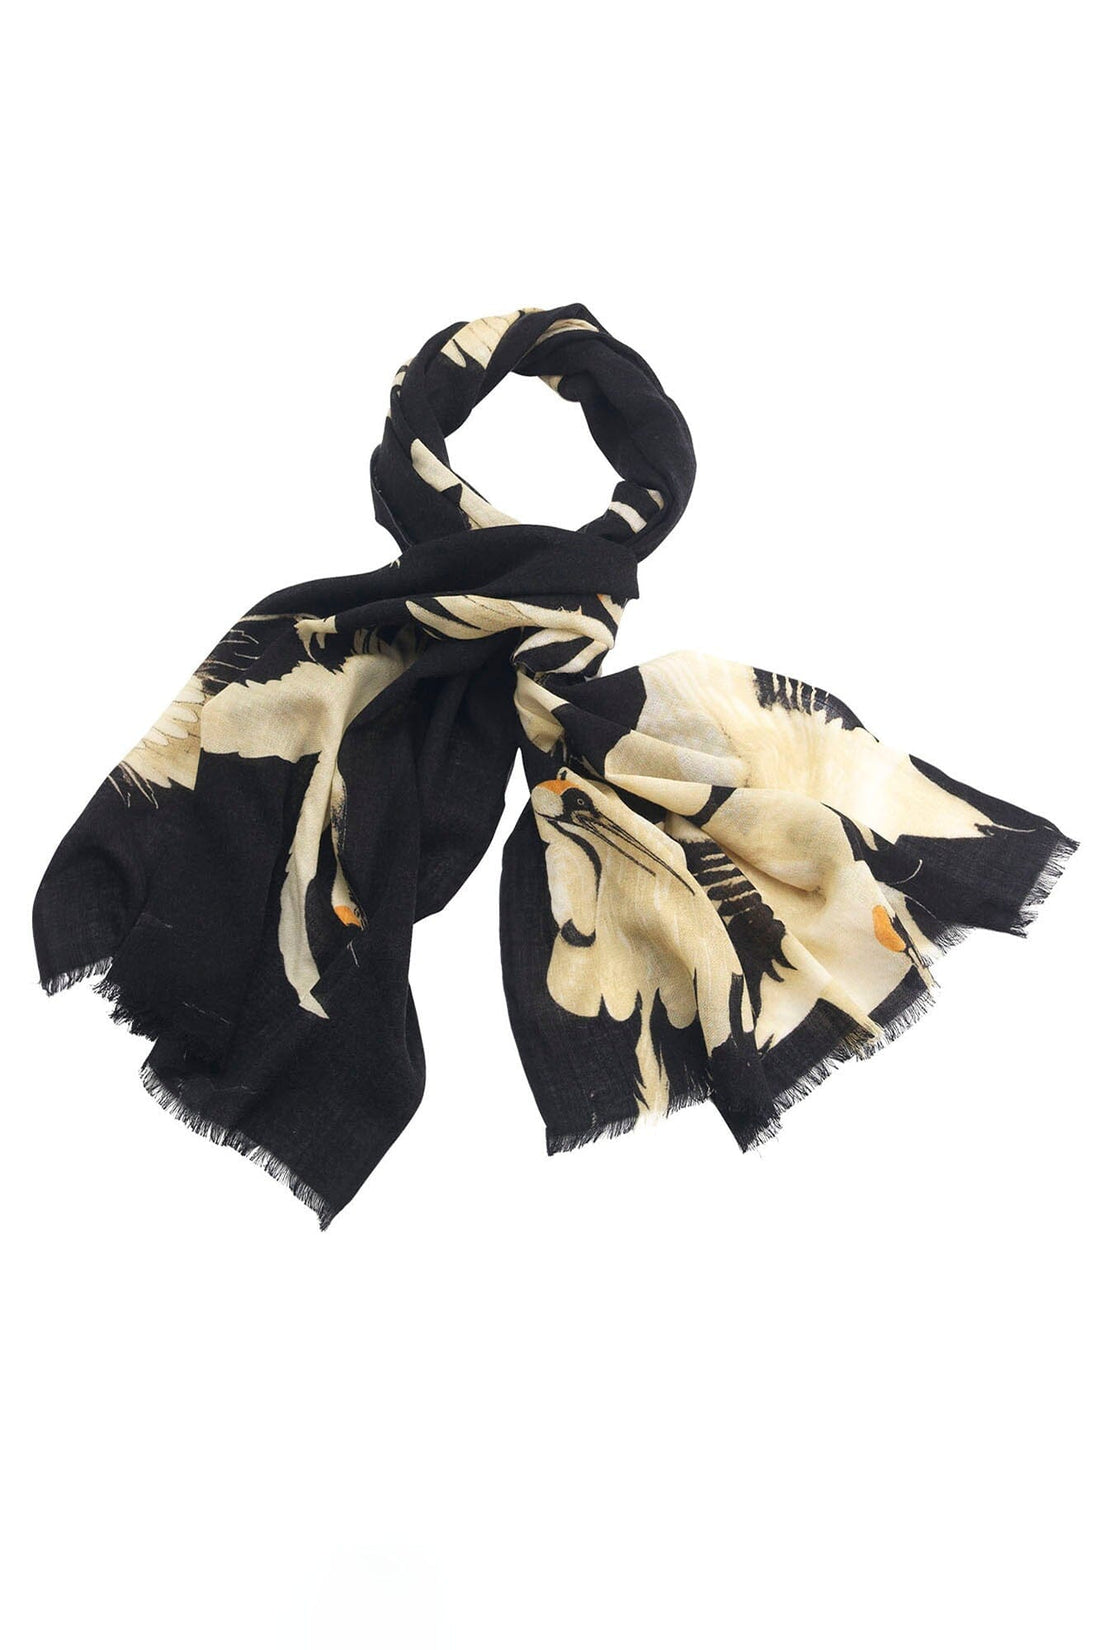 One Hundred Stars Printed Wool Scarf in Black Stork Print - WSCSTOBLK Scarves One Hundred Stars